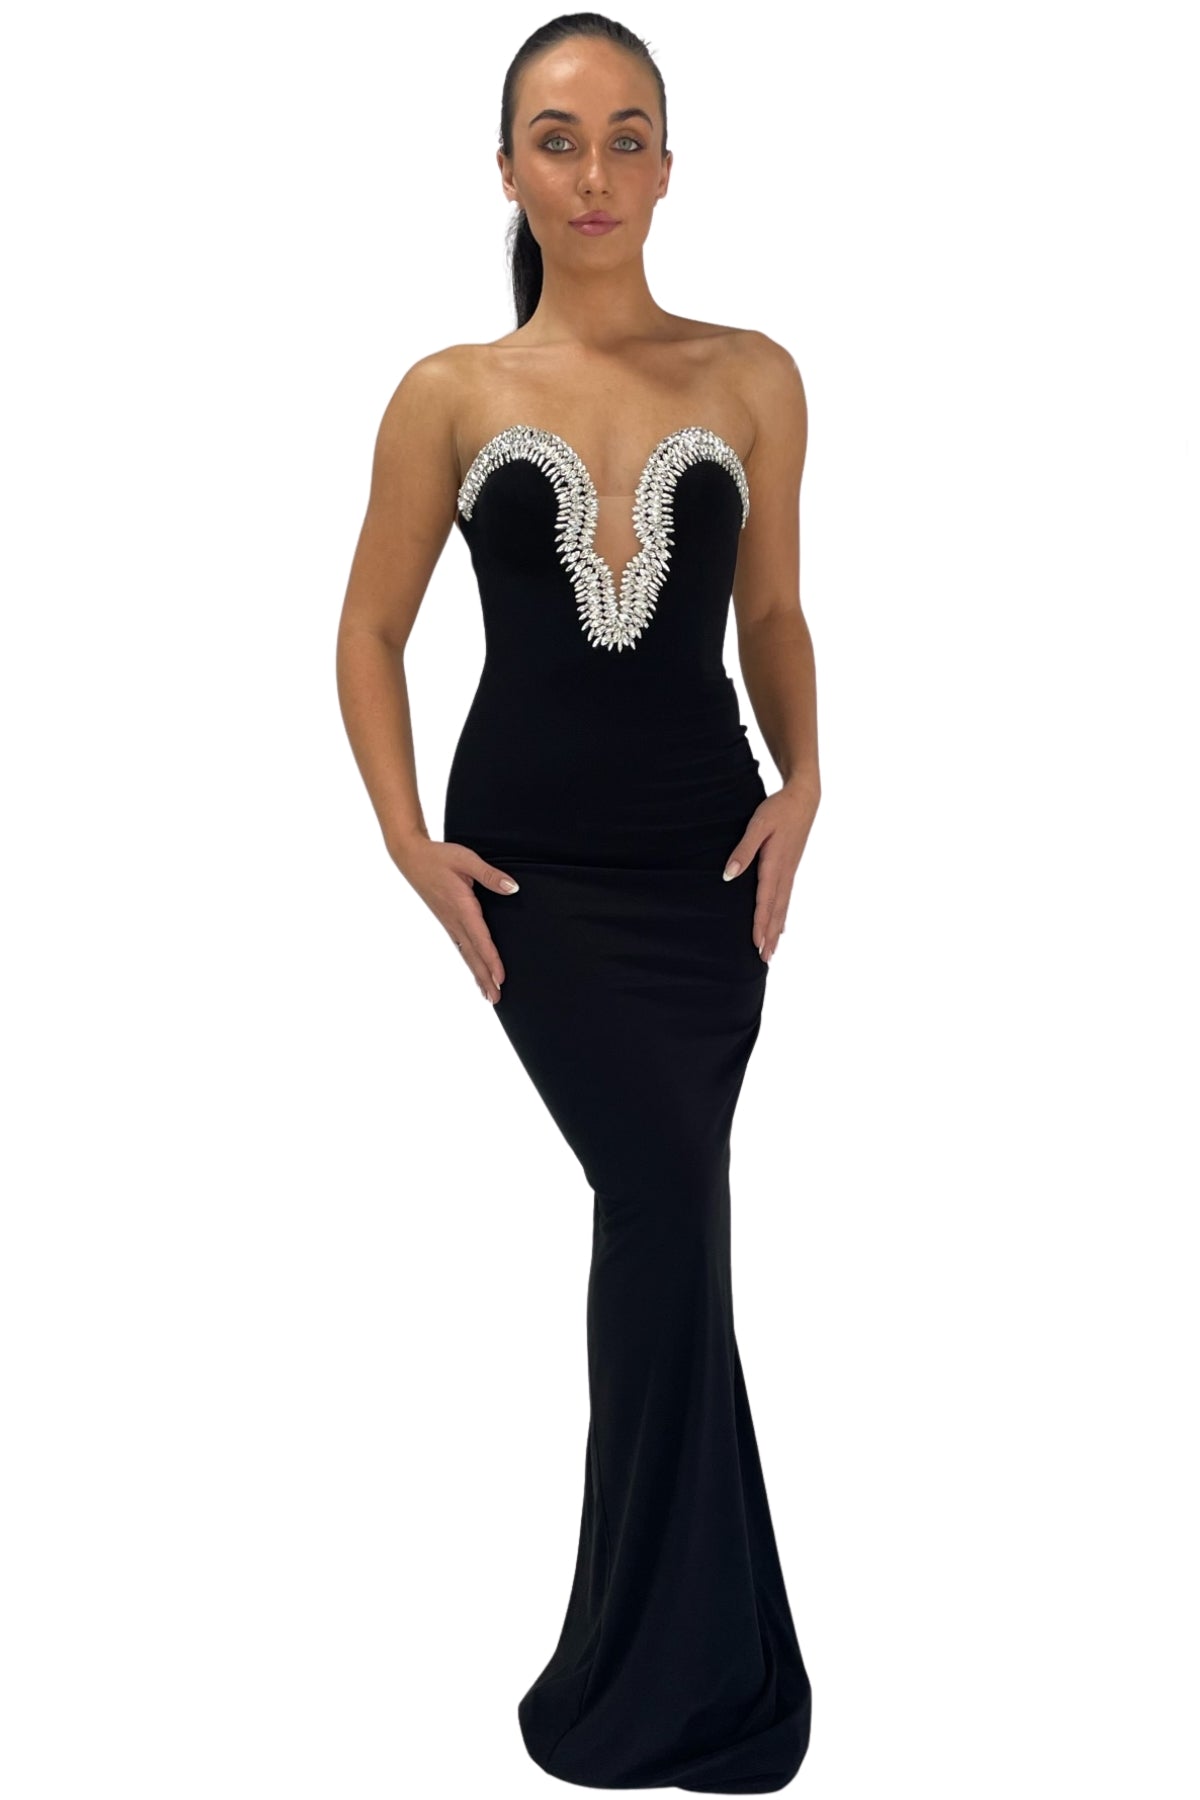 Albina Dyla ALBINA DYLA Classica Gown (Black) - RRP [title],570 - USETHISFORWEBSITEPRODUCT-2023-08-10T125918.000.jpg